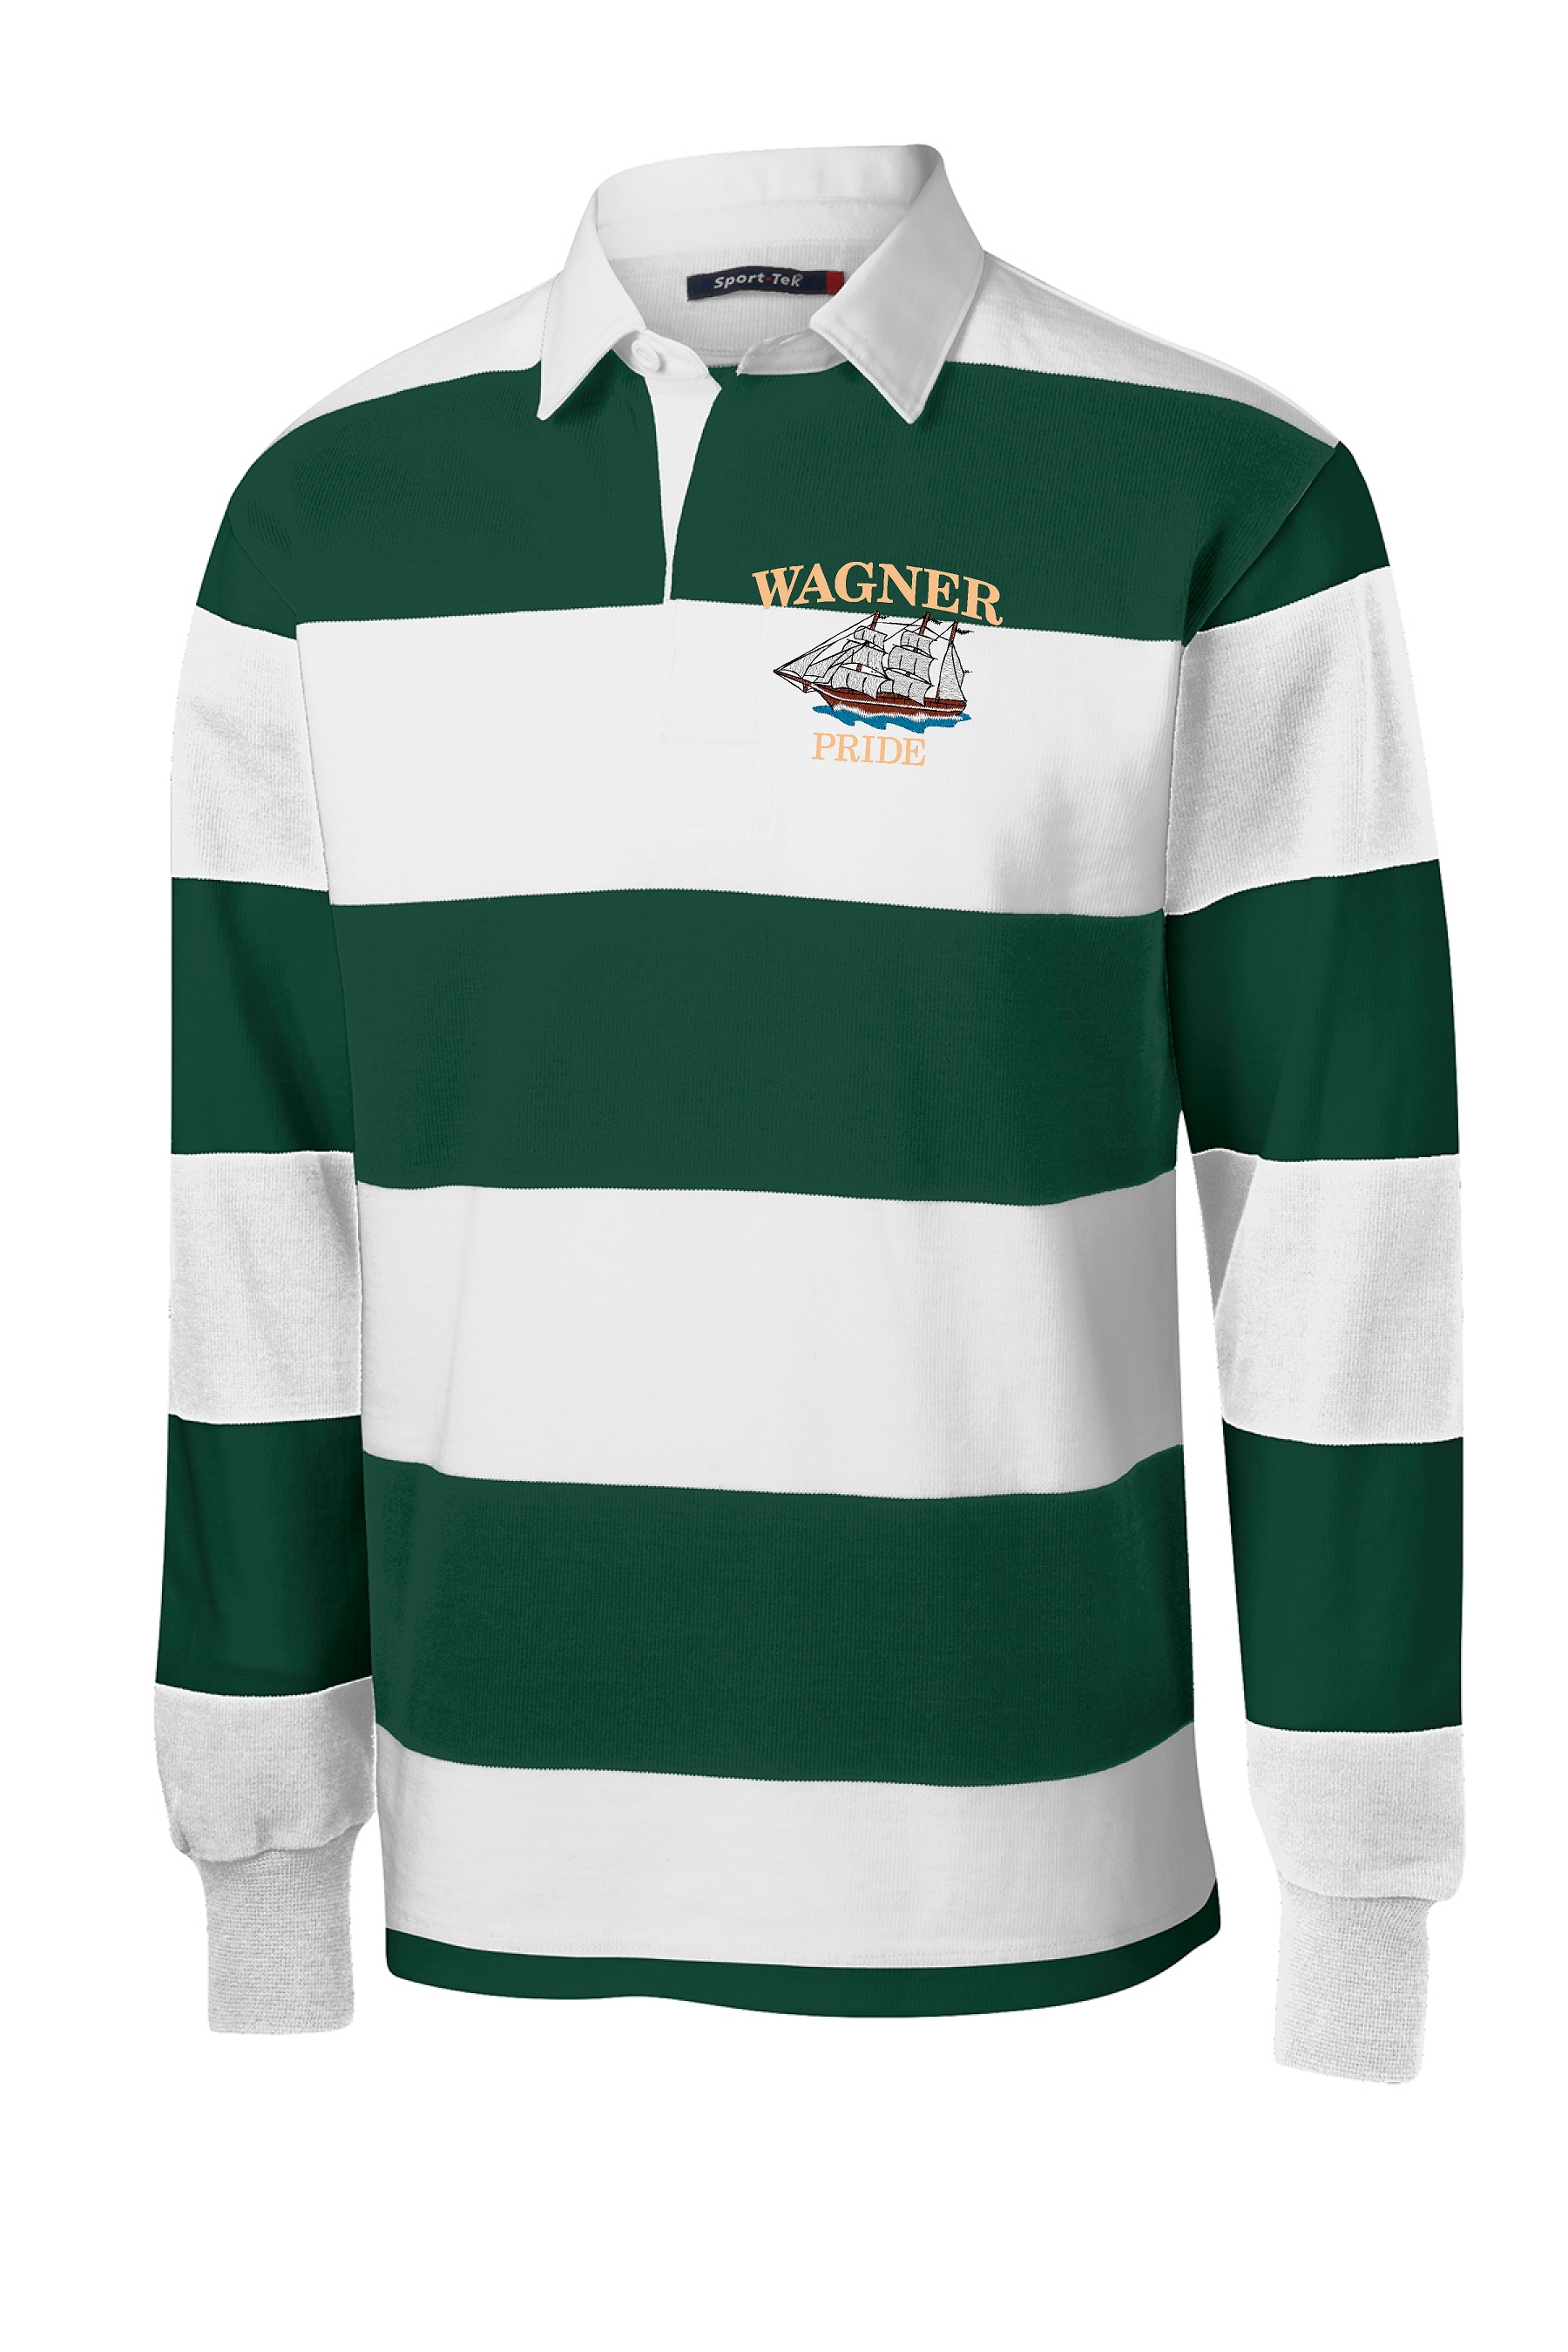 authentic rugby jersey